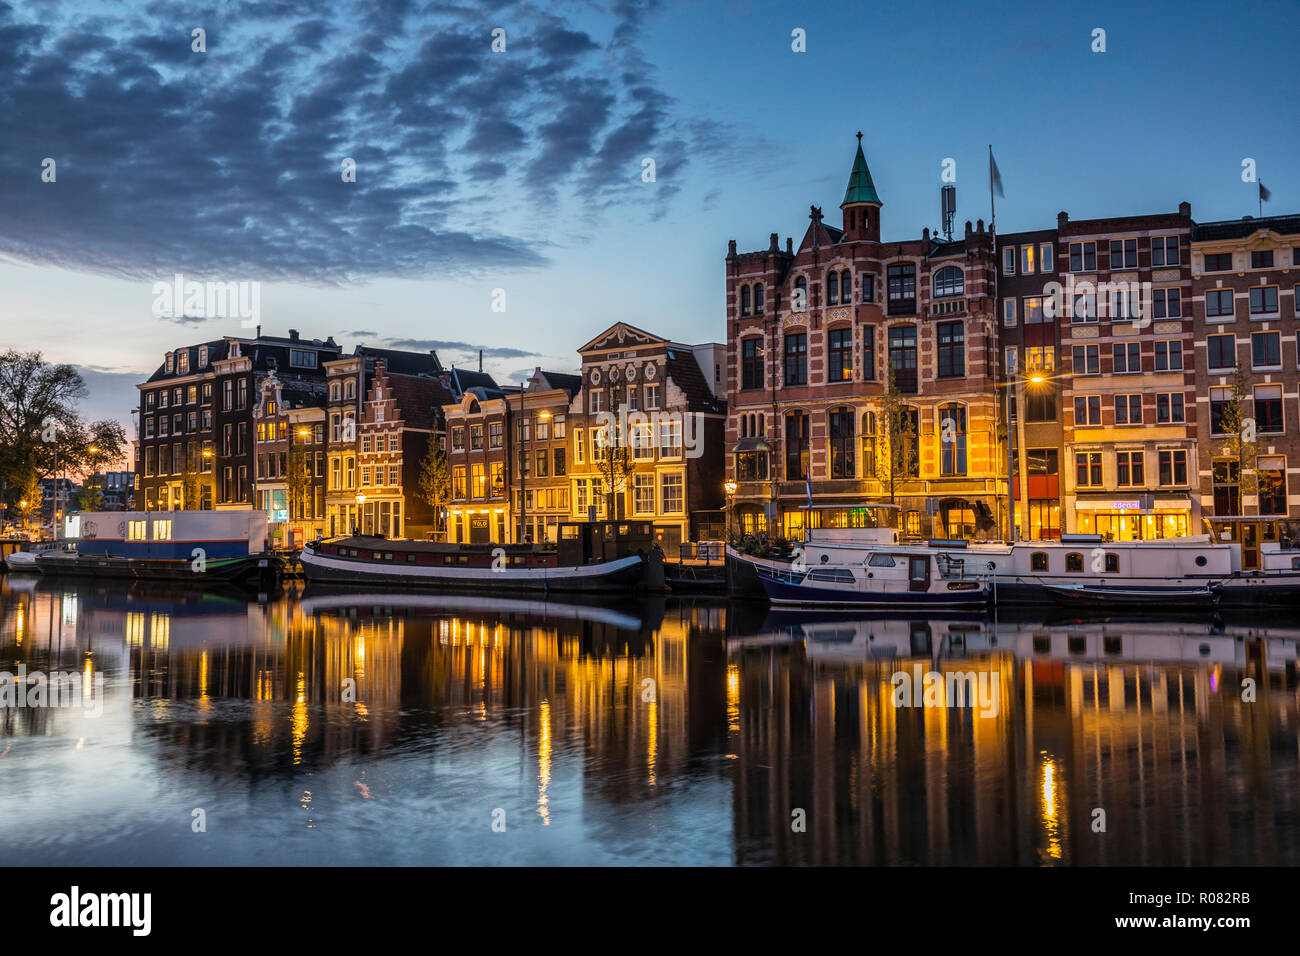 Amsterdan at night. Illuminated buildings and boats in water Stock Photo